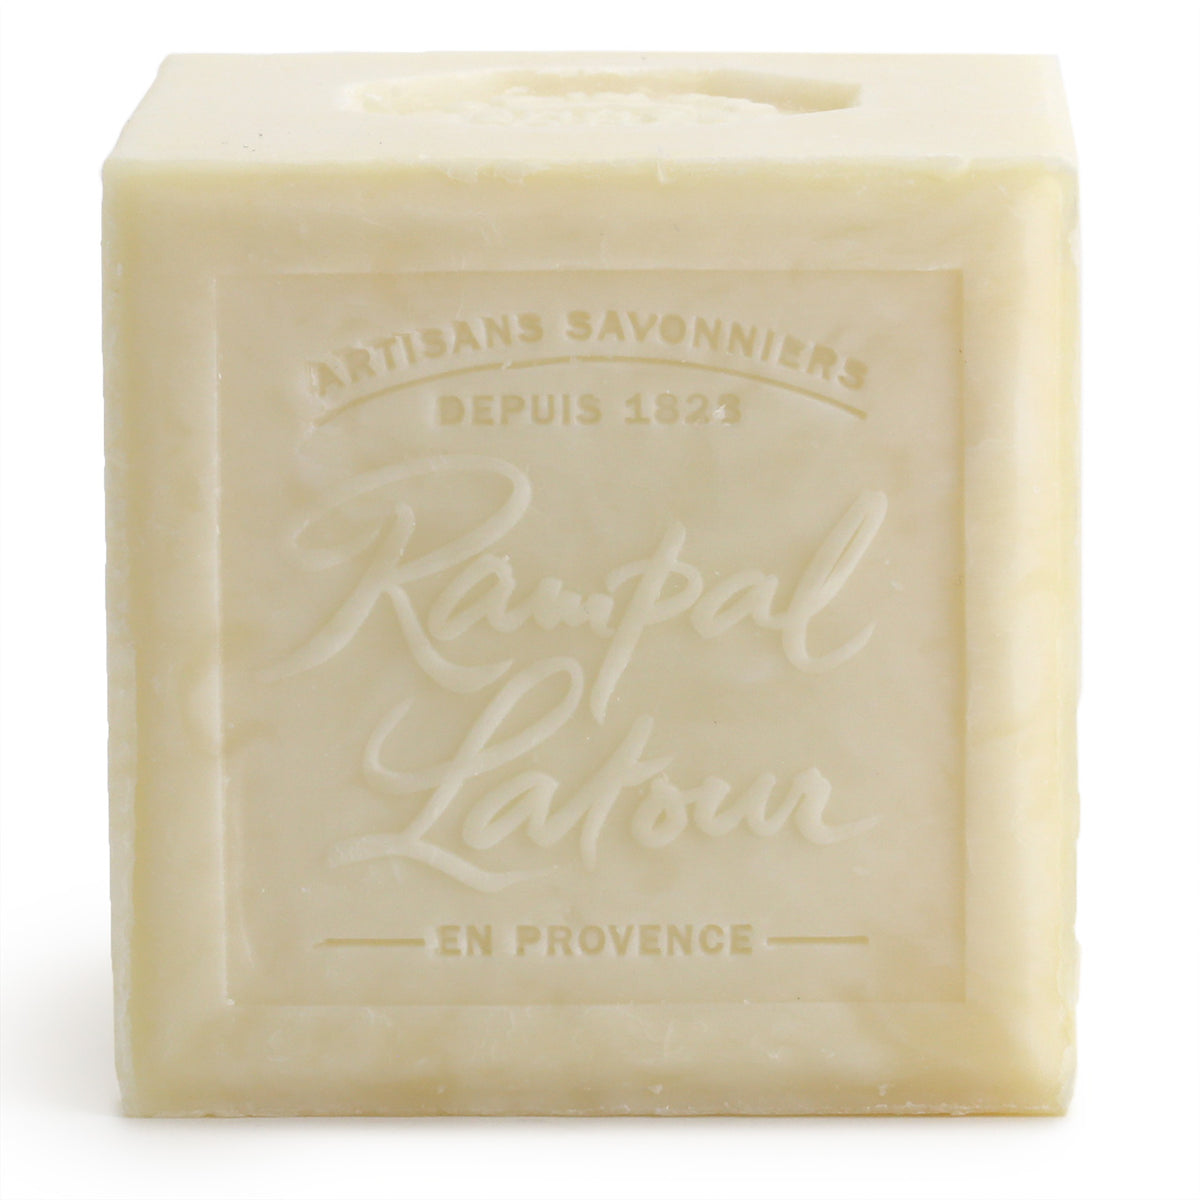 Rampal Latour 600g block of artisan Soap, front view. It&#39;s big. You won&#39;t want to drop it on your foot!